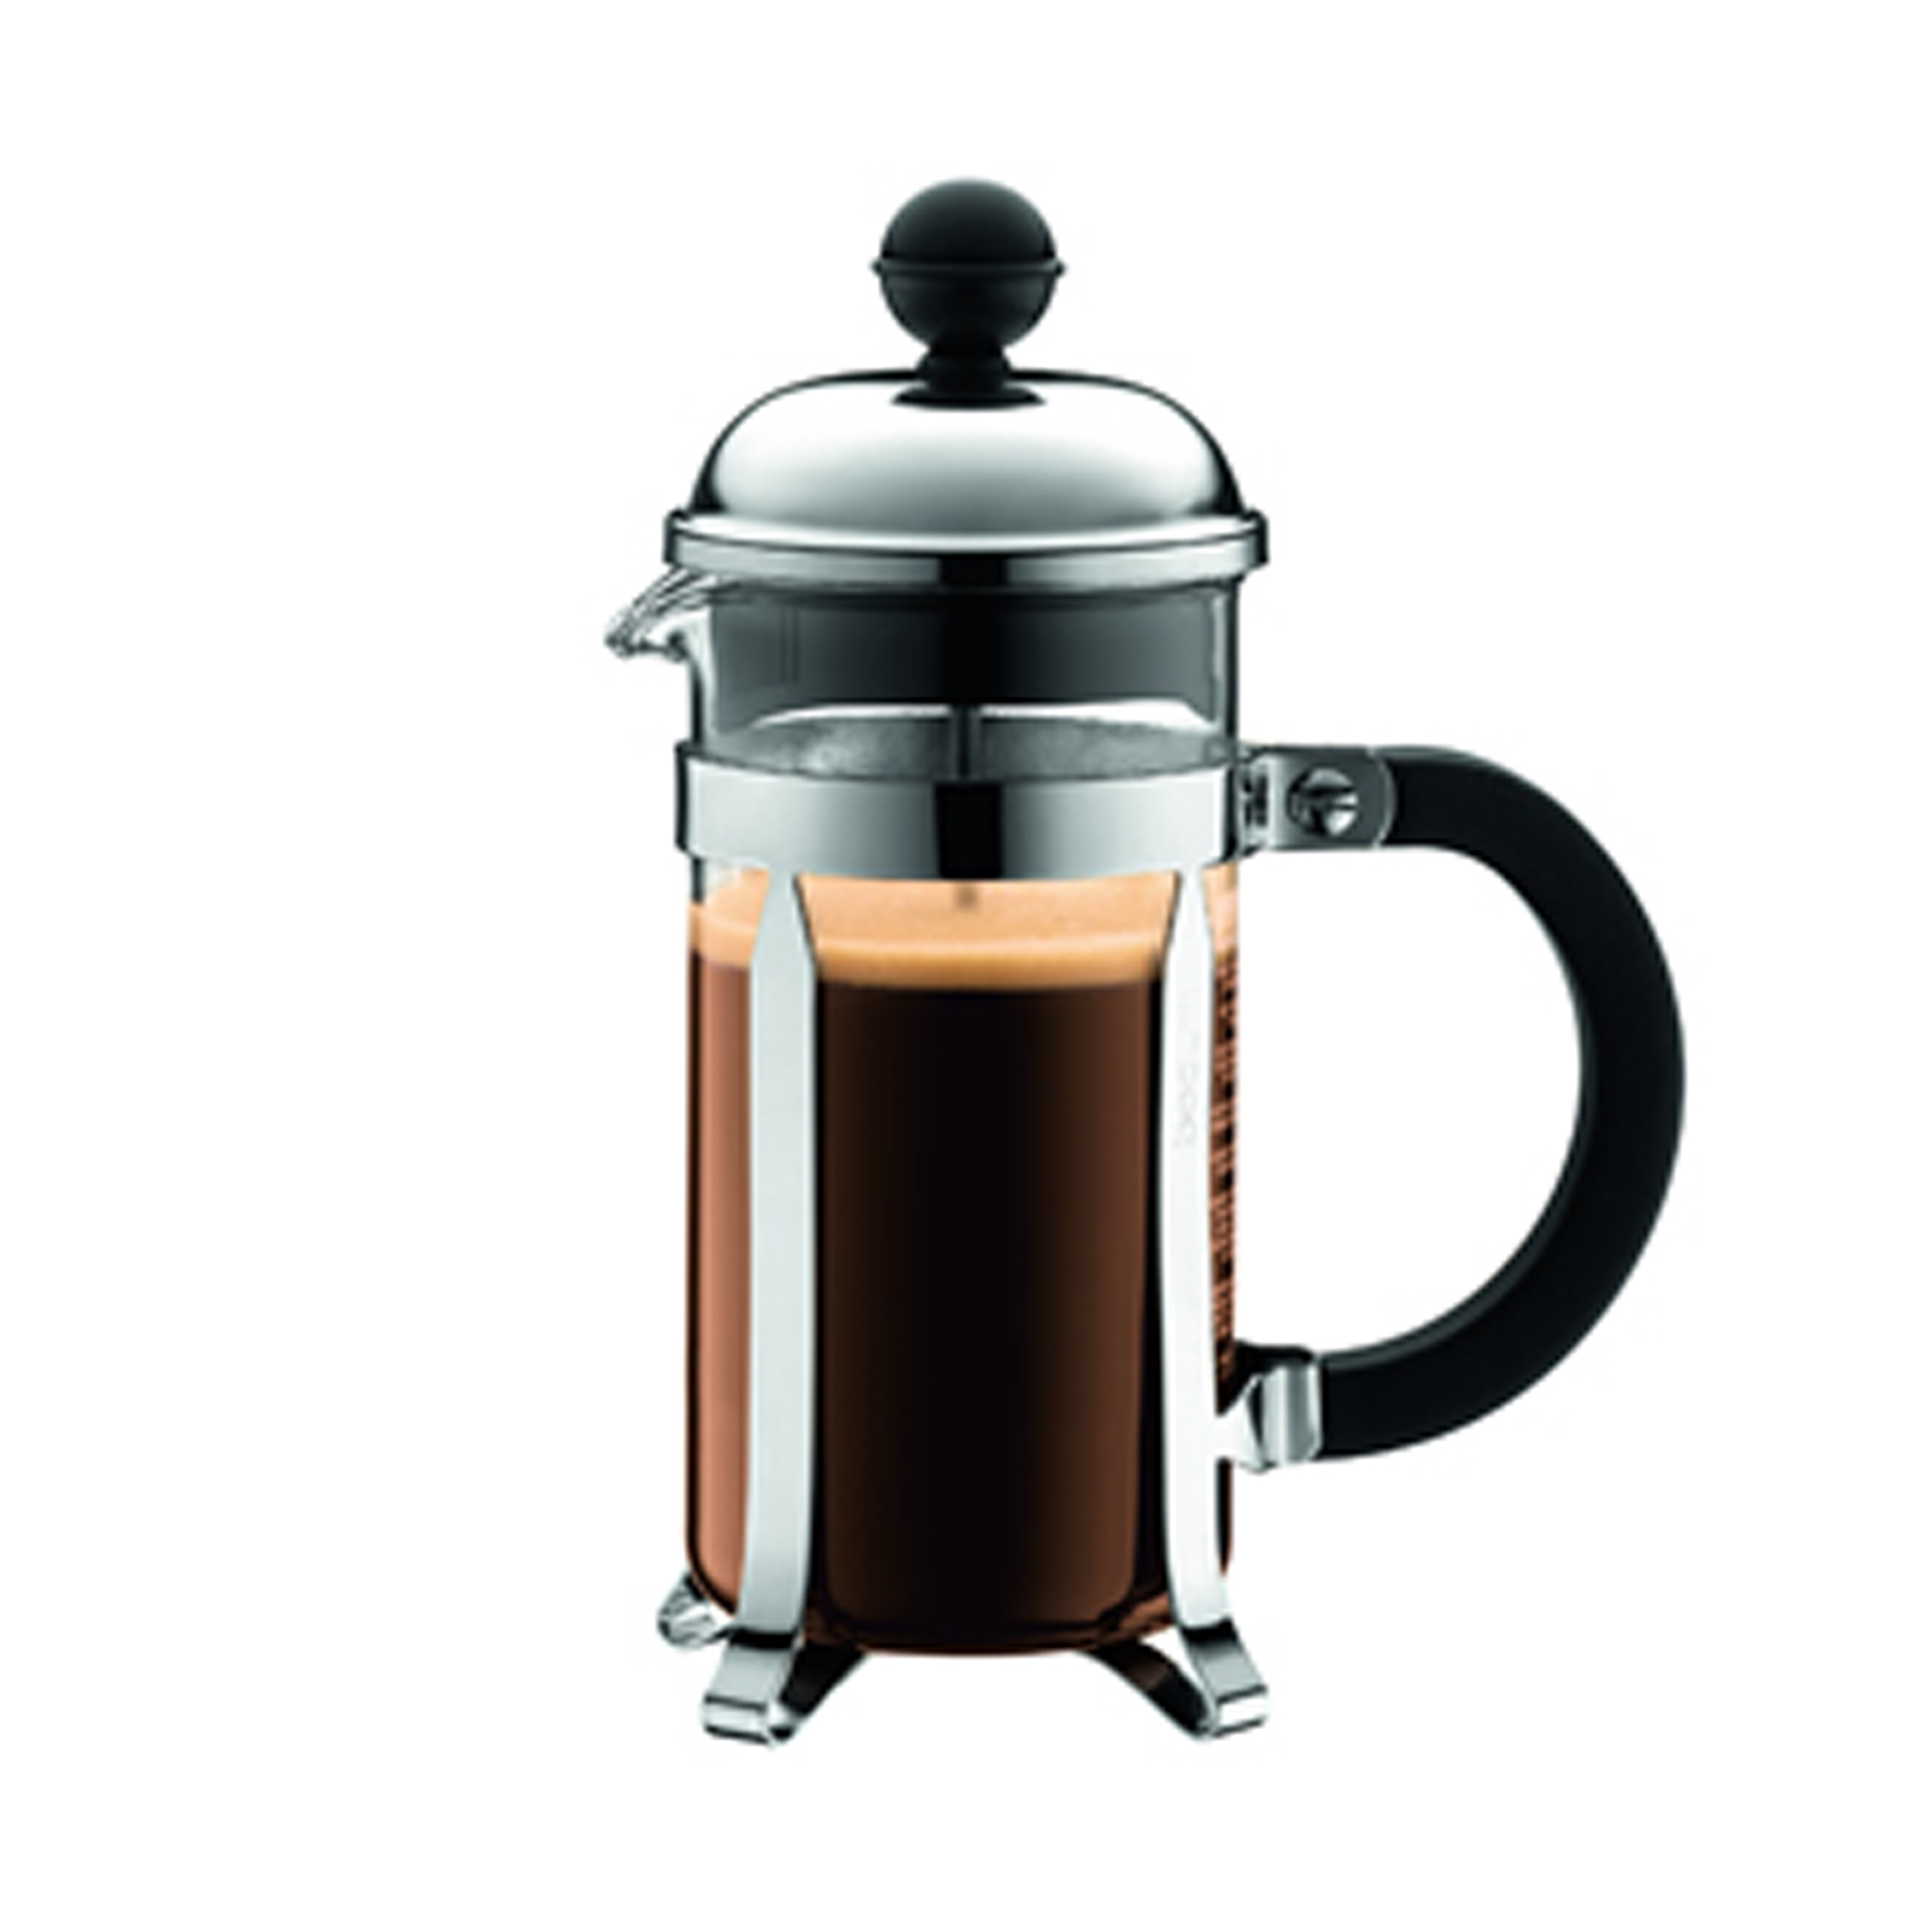 https://www.illy.com/on/demandware.static/-/Sites-masterCatalog_illycaffe/default/dwc55c957e/products/Coffee-Machines/Machines-Filter/US1928_coffee-machines_filter-coffee_chambord-coffee-maker-8-cup_illy-shop/US1928_coffee-machines_filter-coffee_chambord-coffee-maker-8-cup_illy-shop_2000x2000.jpg